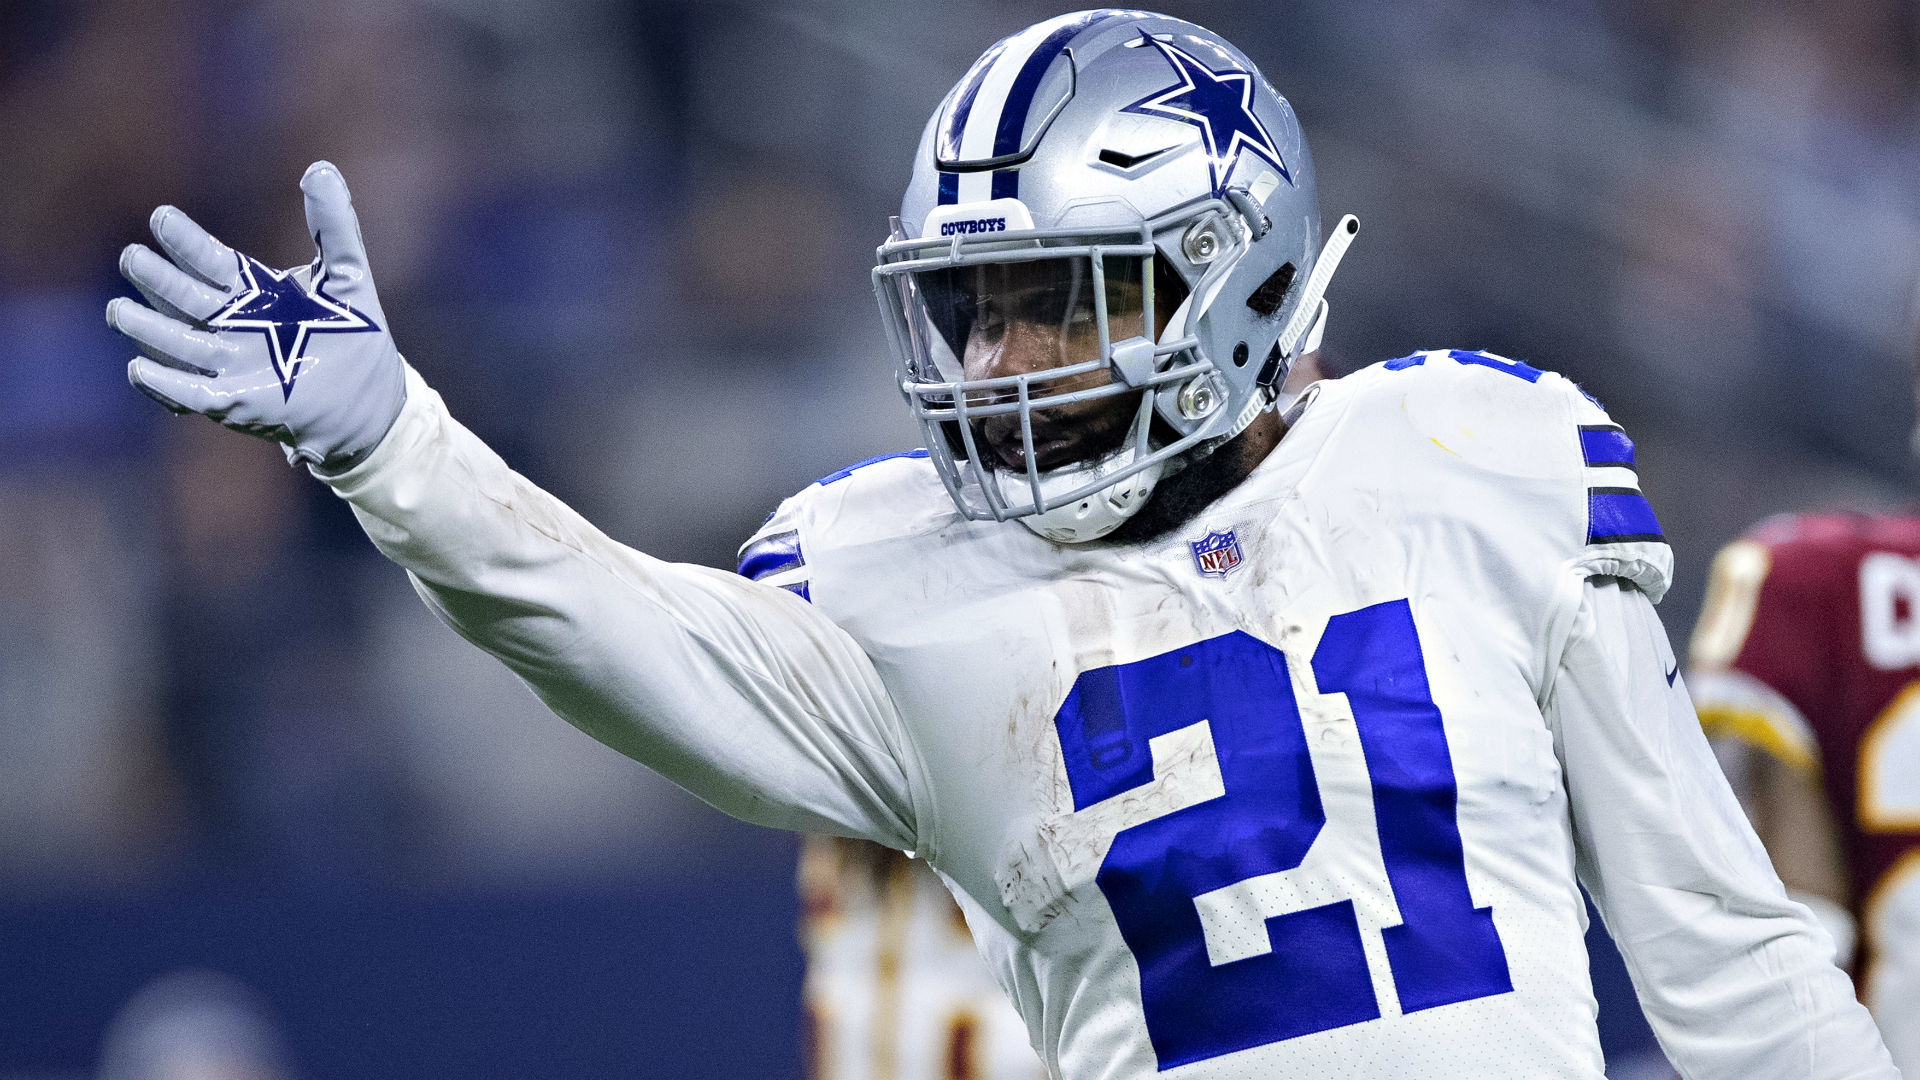 If Cowboys are going to waste money on Ezekiel Elliott, they should do it ASAP